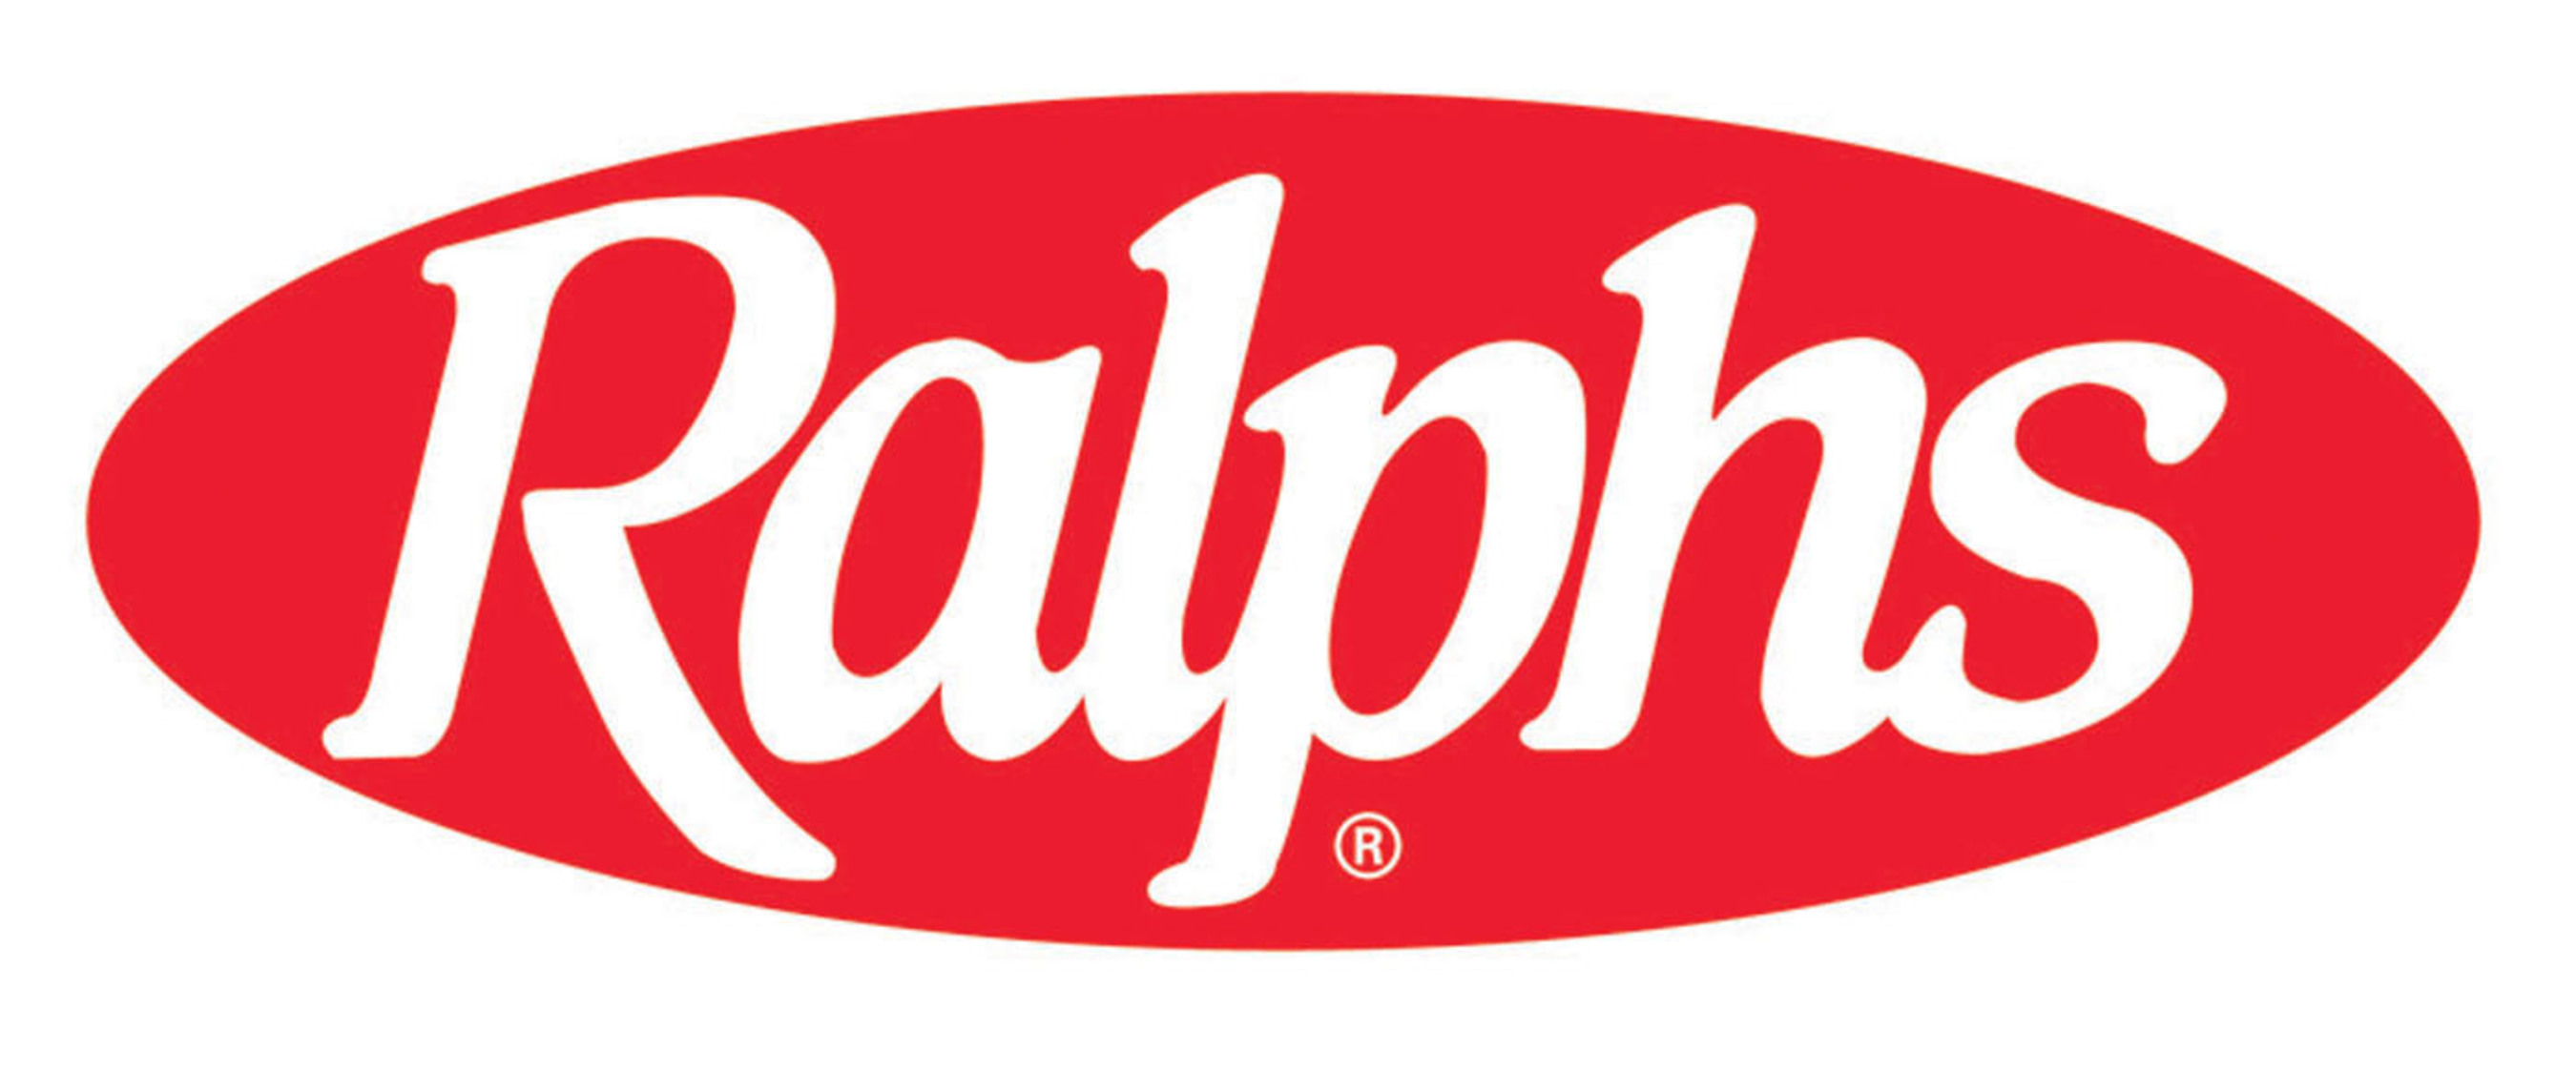 Ralphs - Even more Low prices... and fast checkout too! (PRNewsFoto/Ralphs Grocery Company) (PRNewsFoto/)